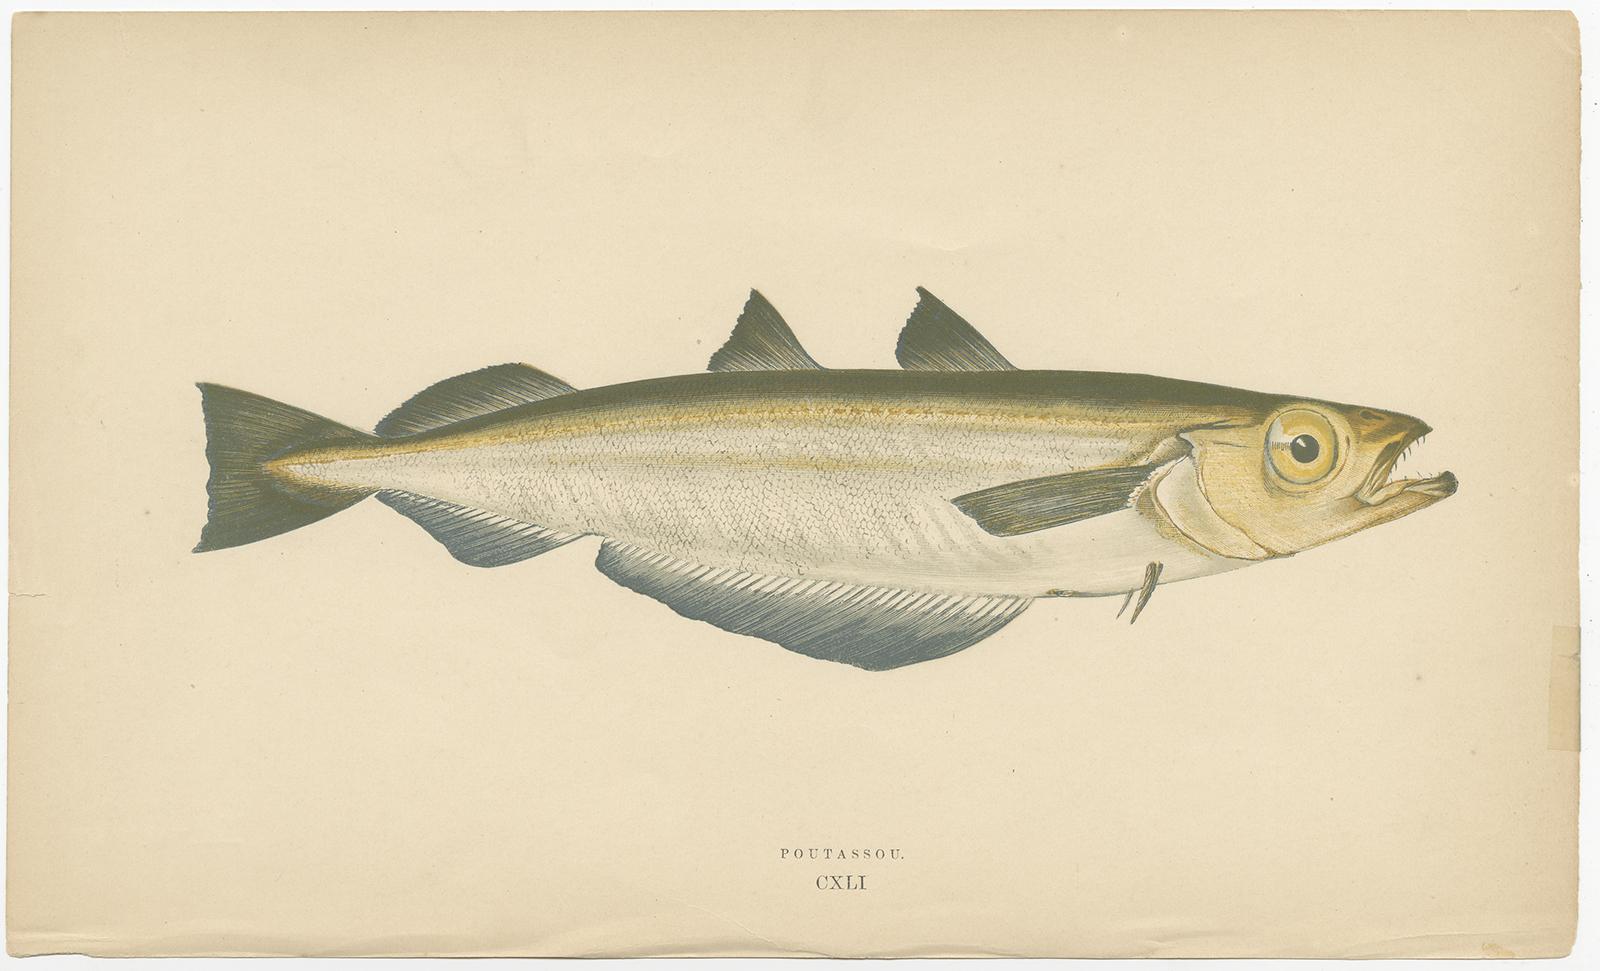 The image is an antique fish print titled 